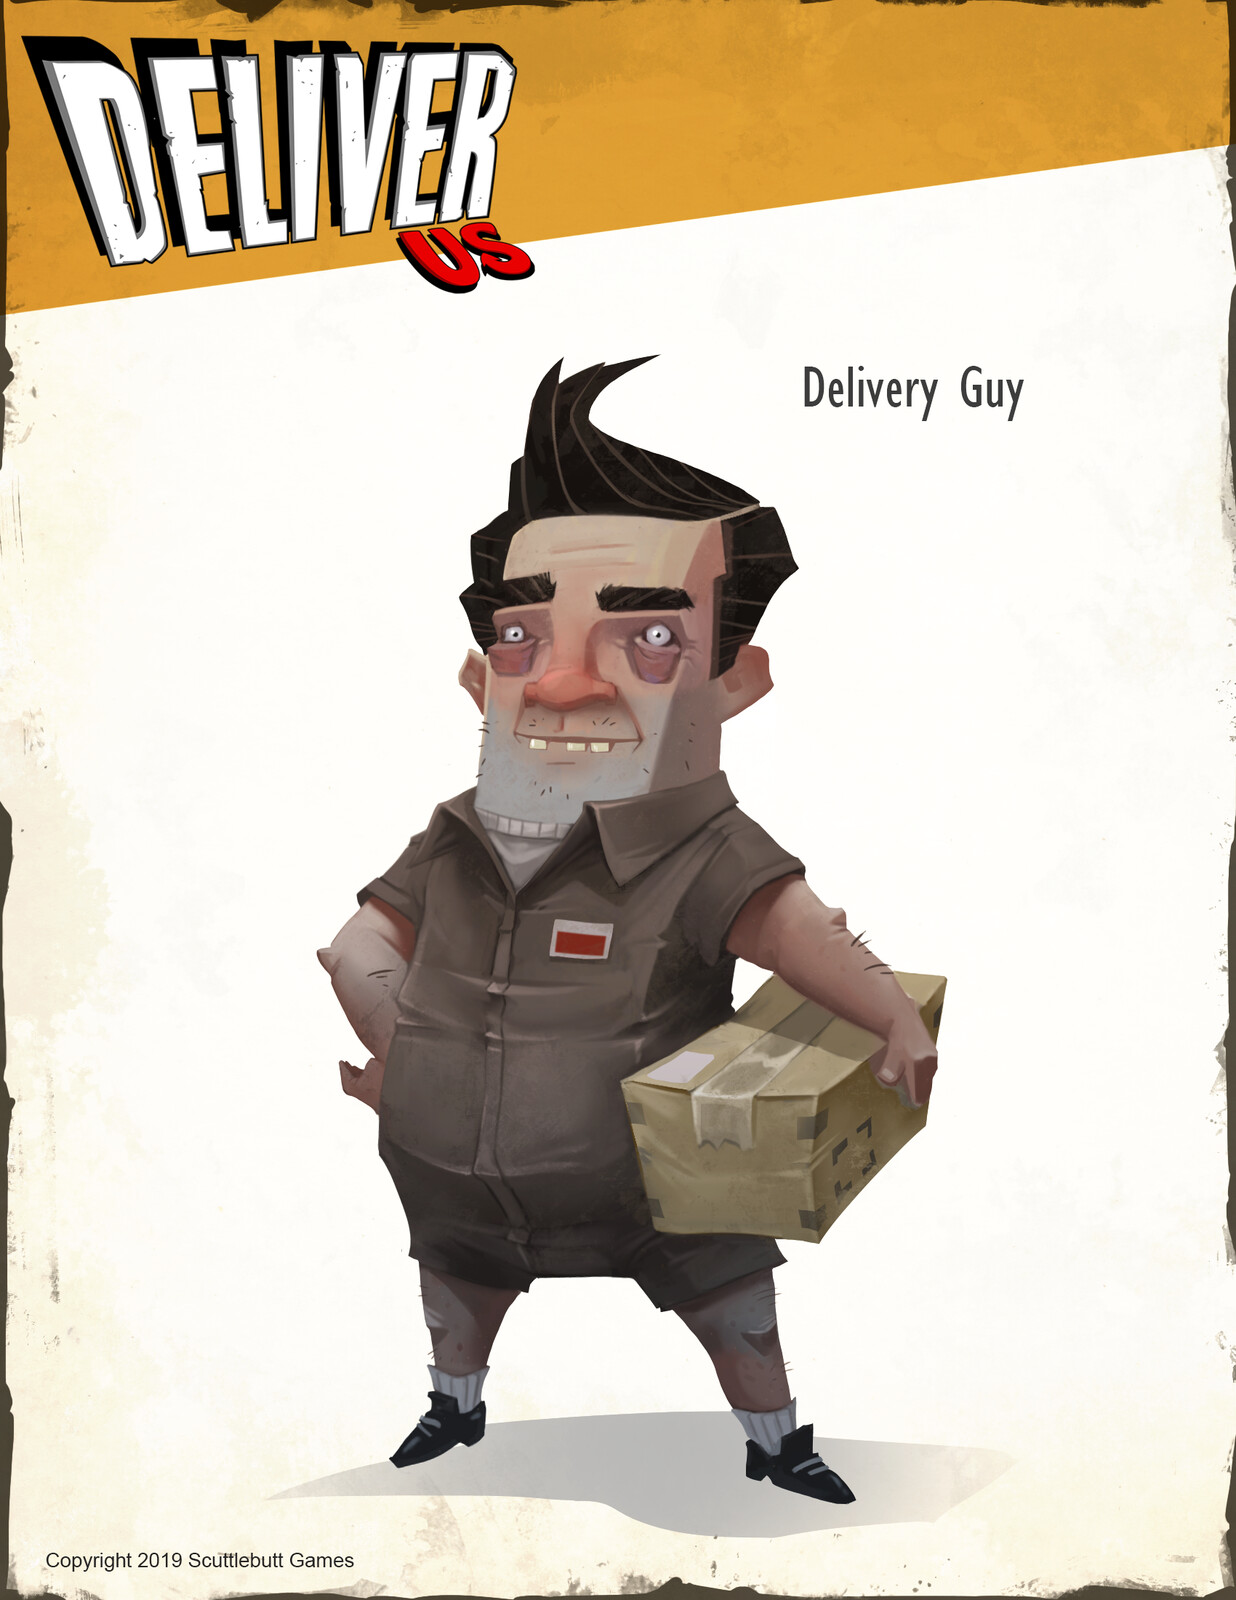 The Deliverer is an everyday Joe. Not your typical post apocalyptic hero. I was heavily inspired by the character designs from Paranorman and other Laika films.